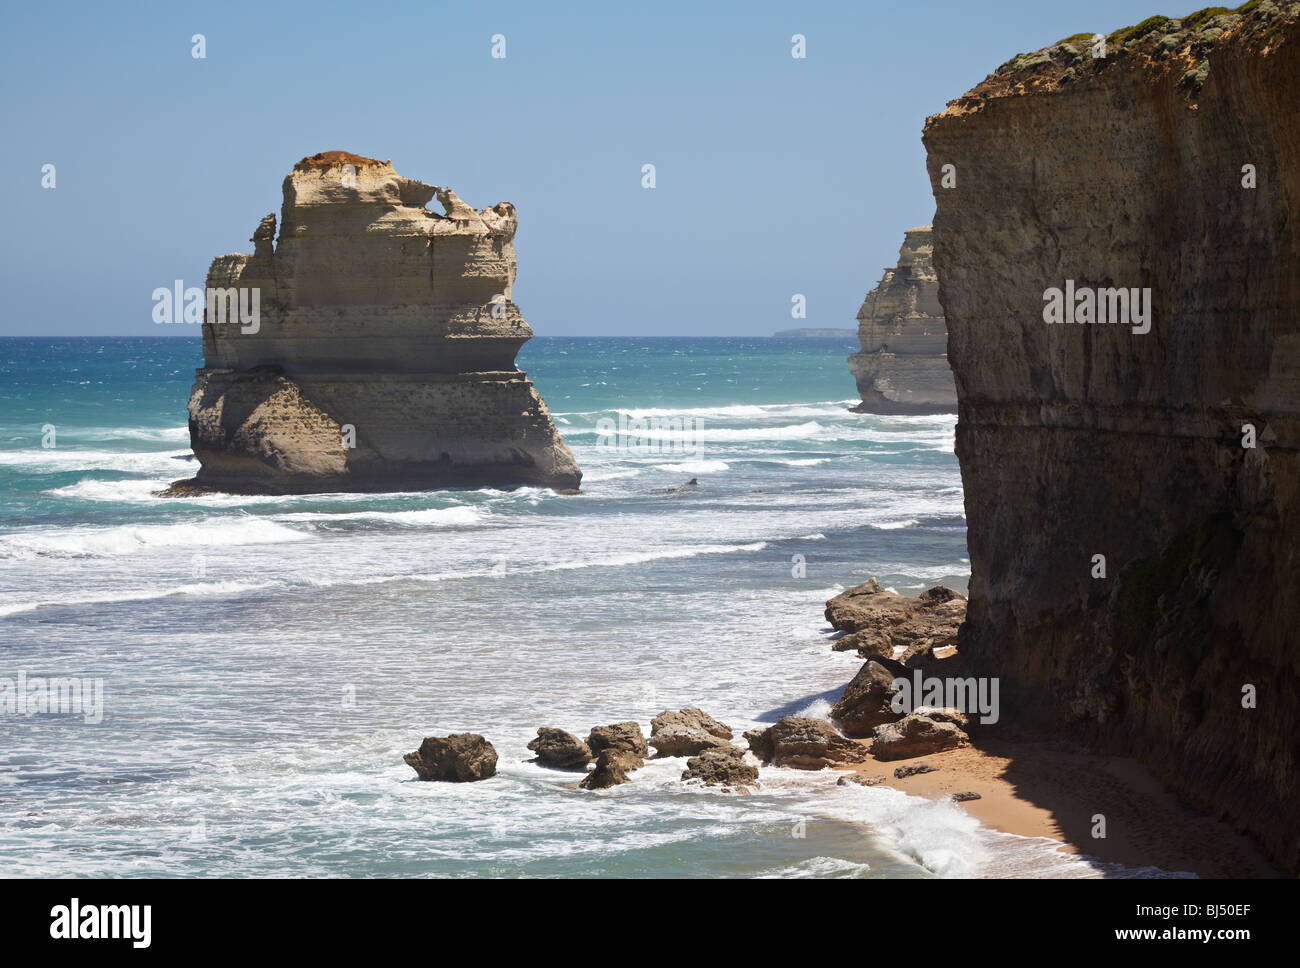 One of the twelve Apostles seen from the Gibson Steps, Port Campbell National Park, Victoria Australia Stock Photo